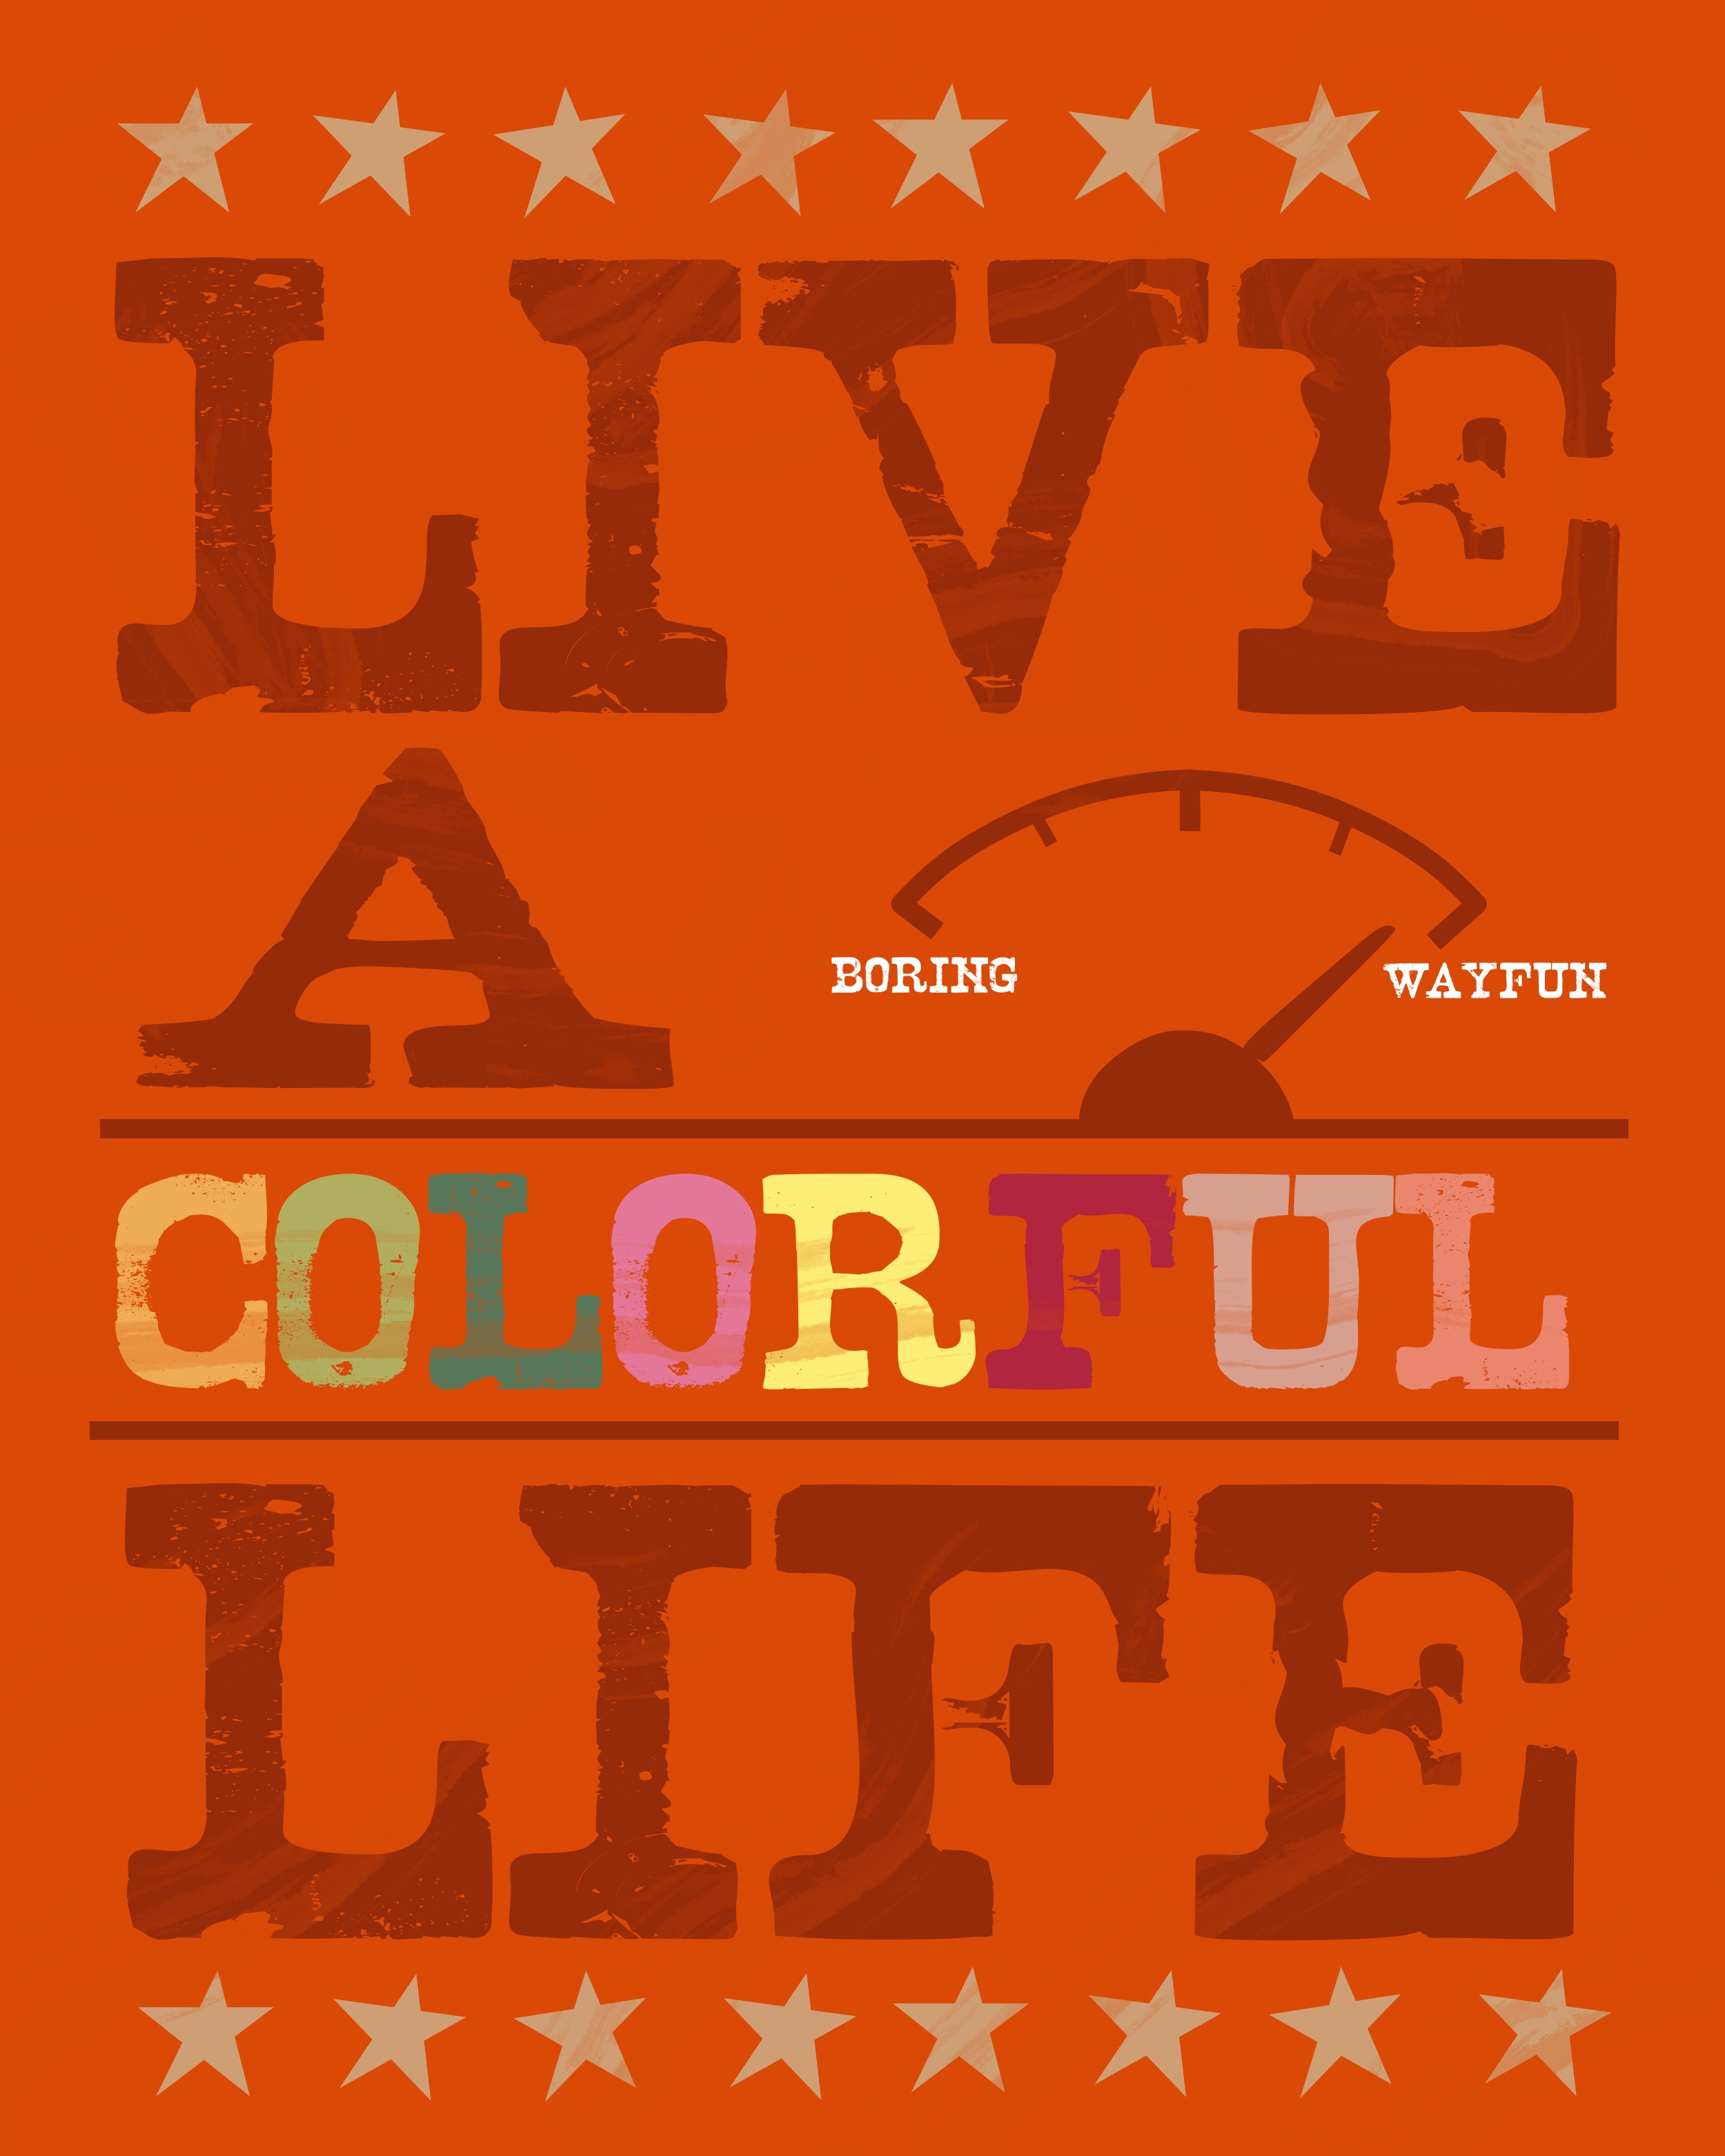 live-colorful3-everything-etsy-8x10-jpg-2-500-3-125-pixels-color